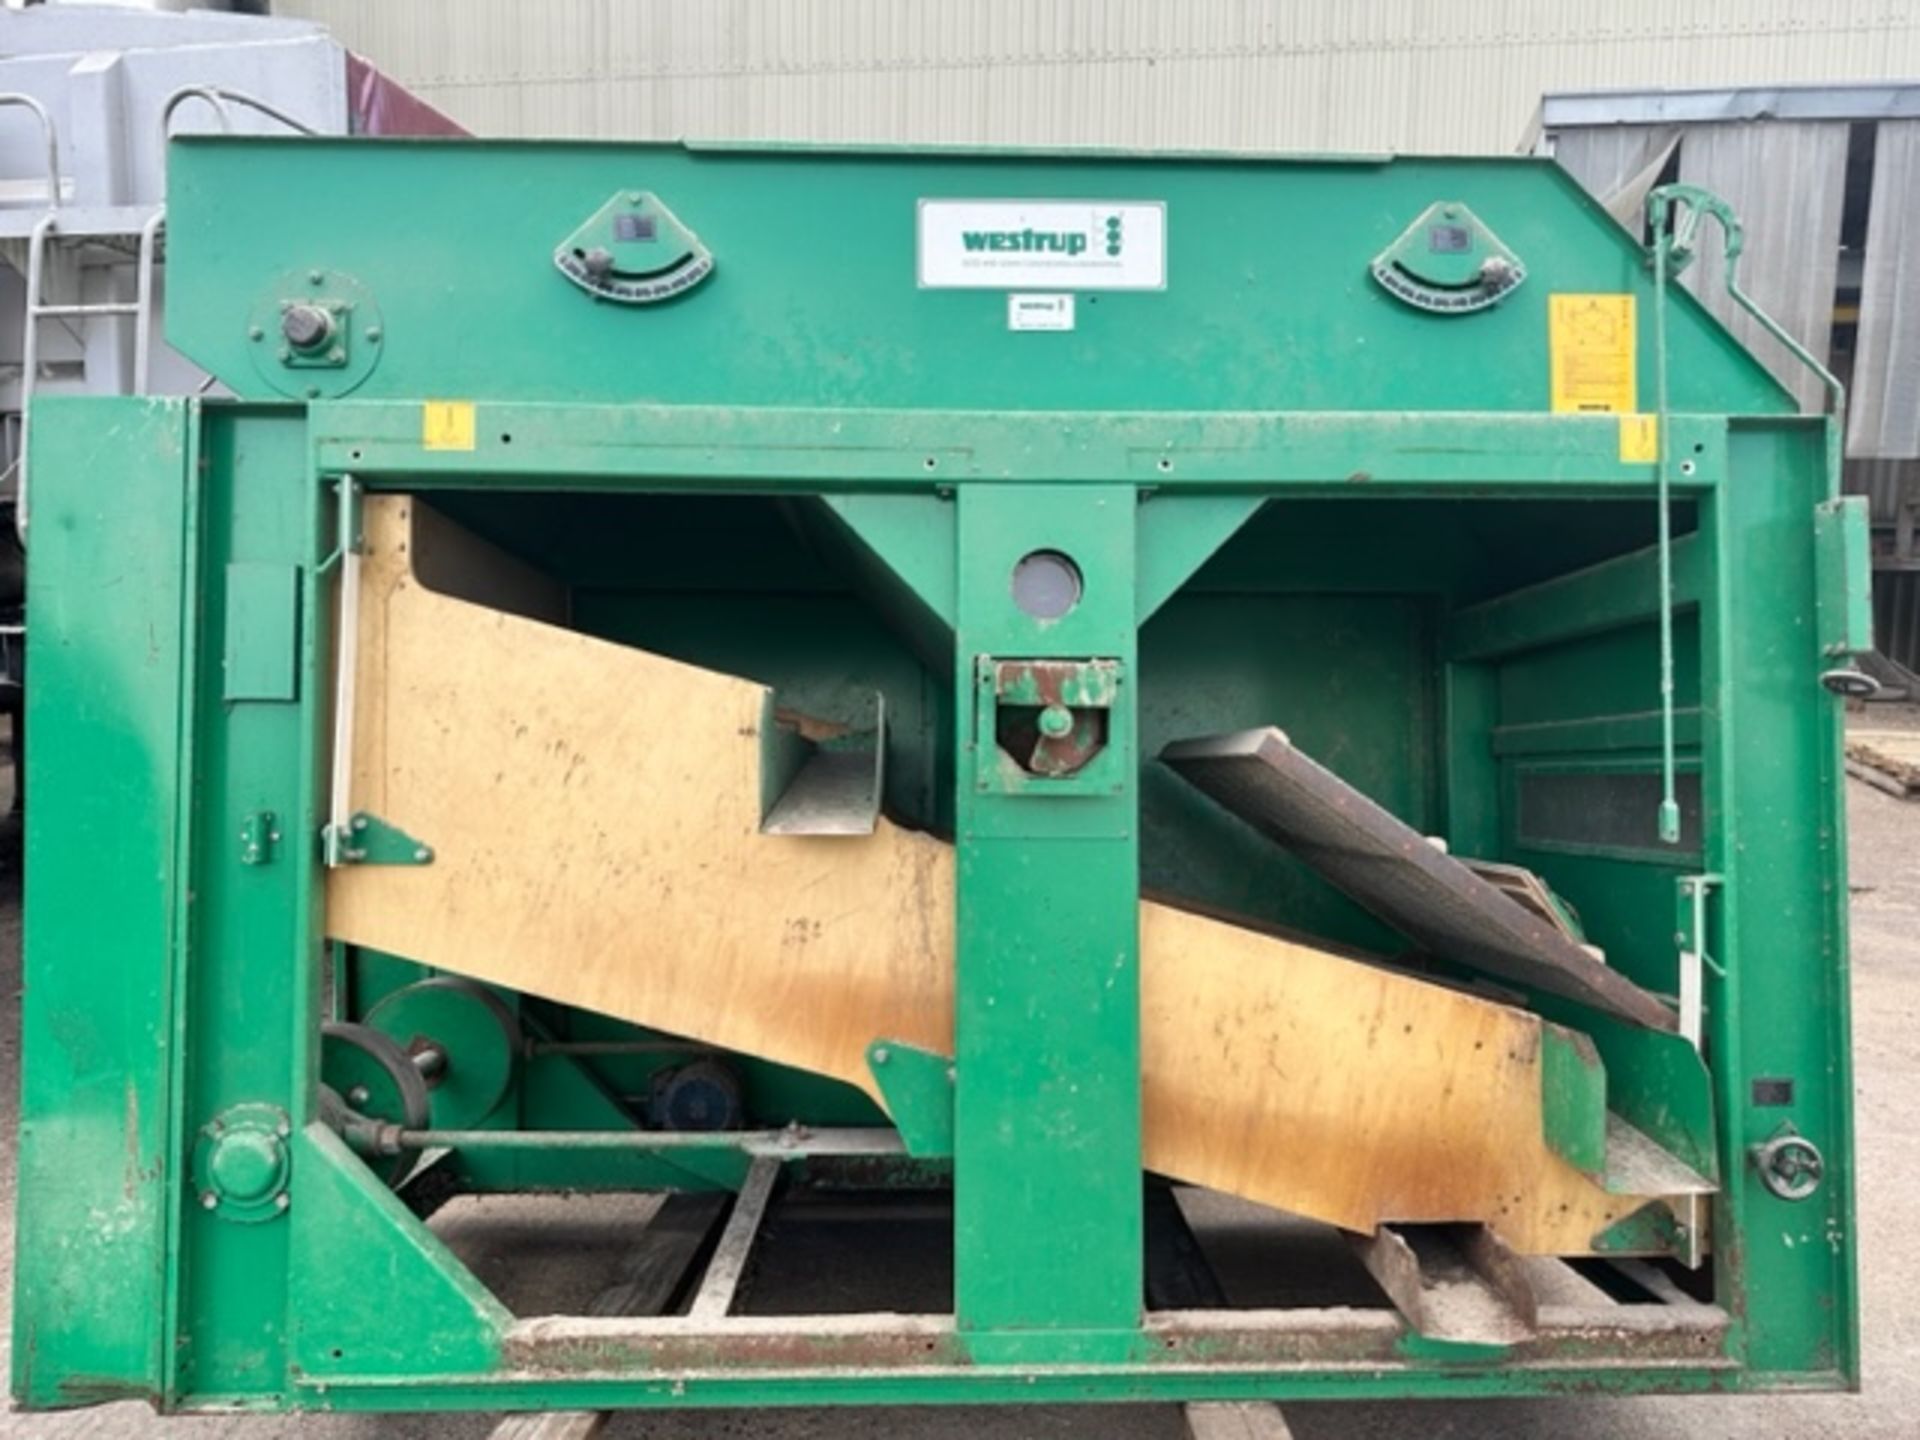 Westrup SAB-1000 Pre Cleaner Machine (no aspiration fan). Loading free of charge - yes. Lot location - Image 2 of 15